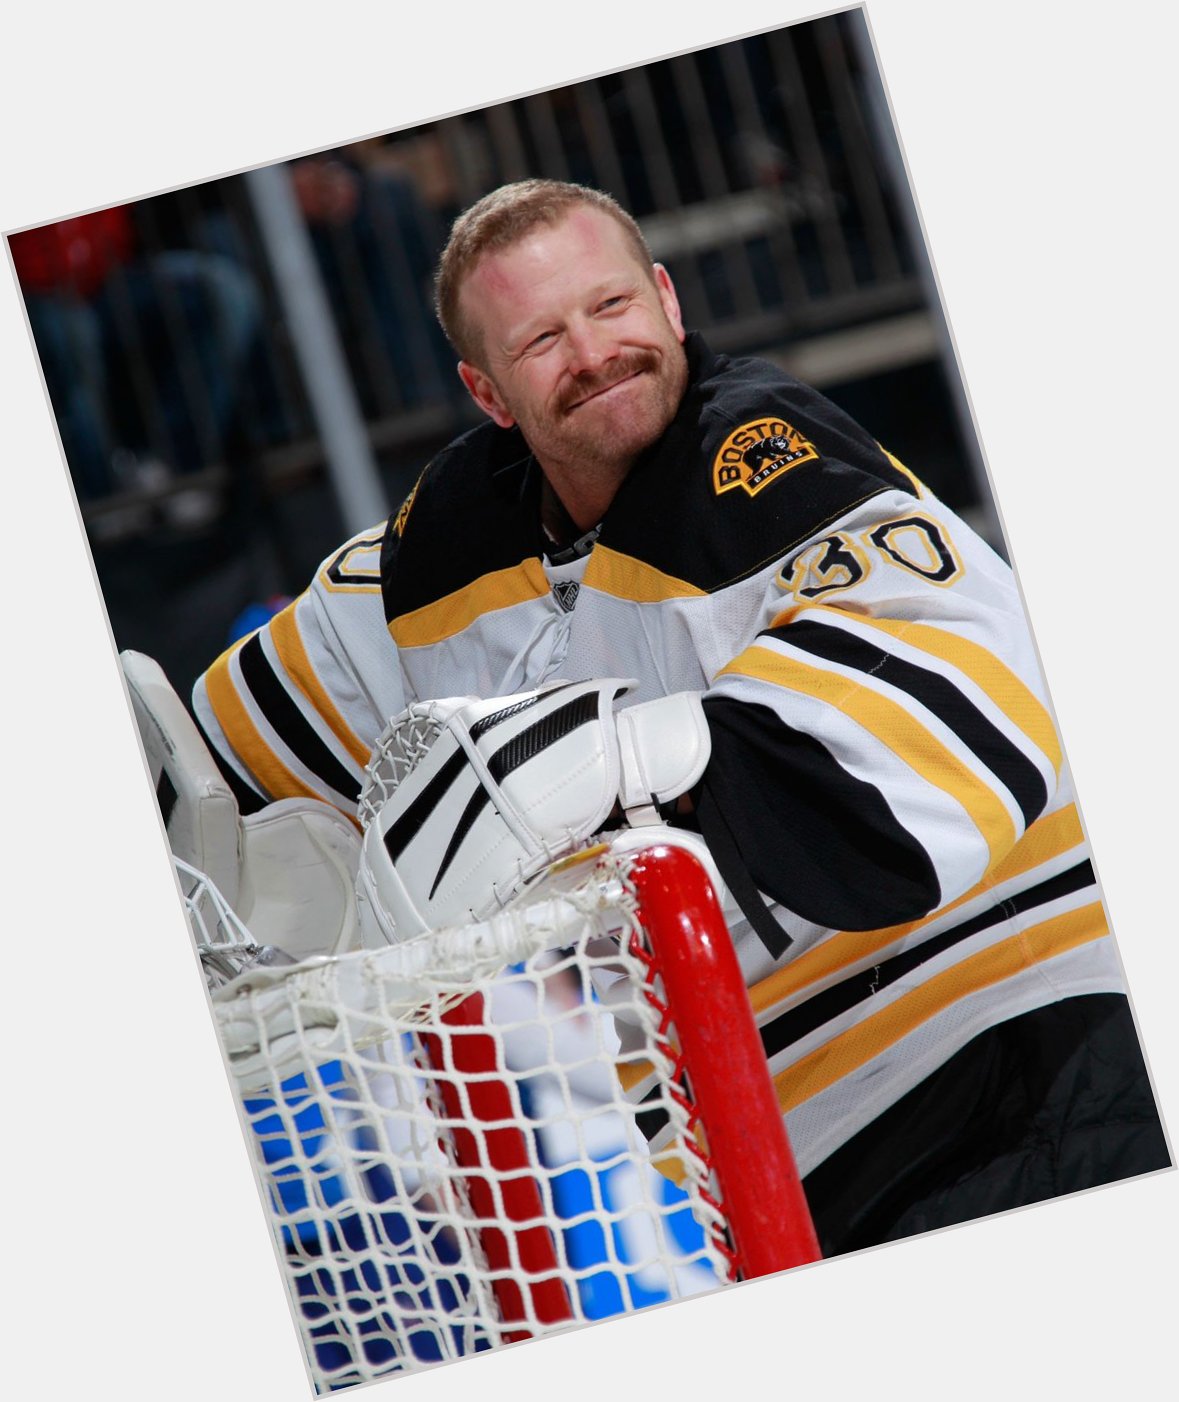 HAPPY BIRTHDAY TO THE MF GOAT,MY FAVE PLAYER OF ALL TIME TIM THOMAS!!!THANK U FOR OUR CUP BACK IN 2011  